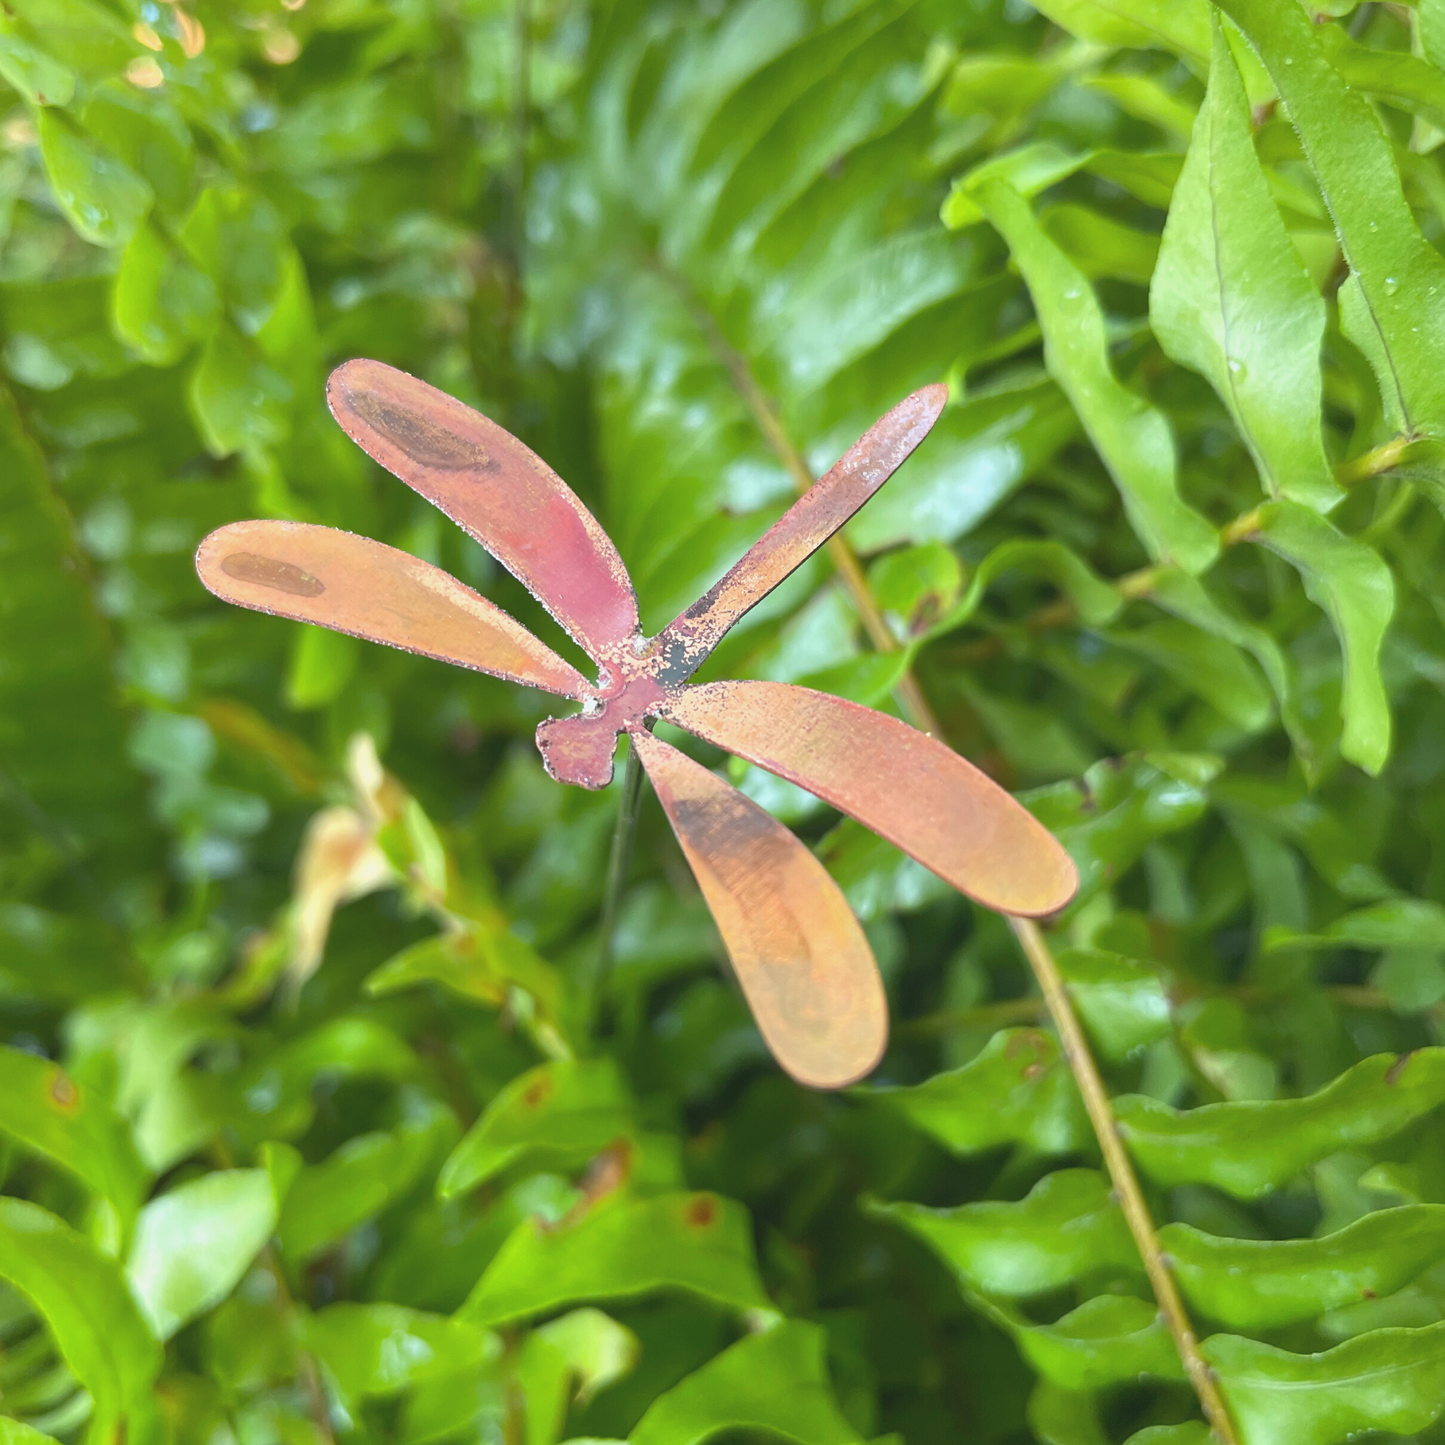 Small Natural Copper Dragonflies- Set of 6